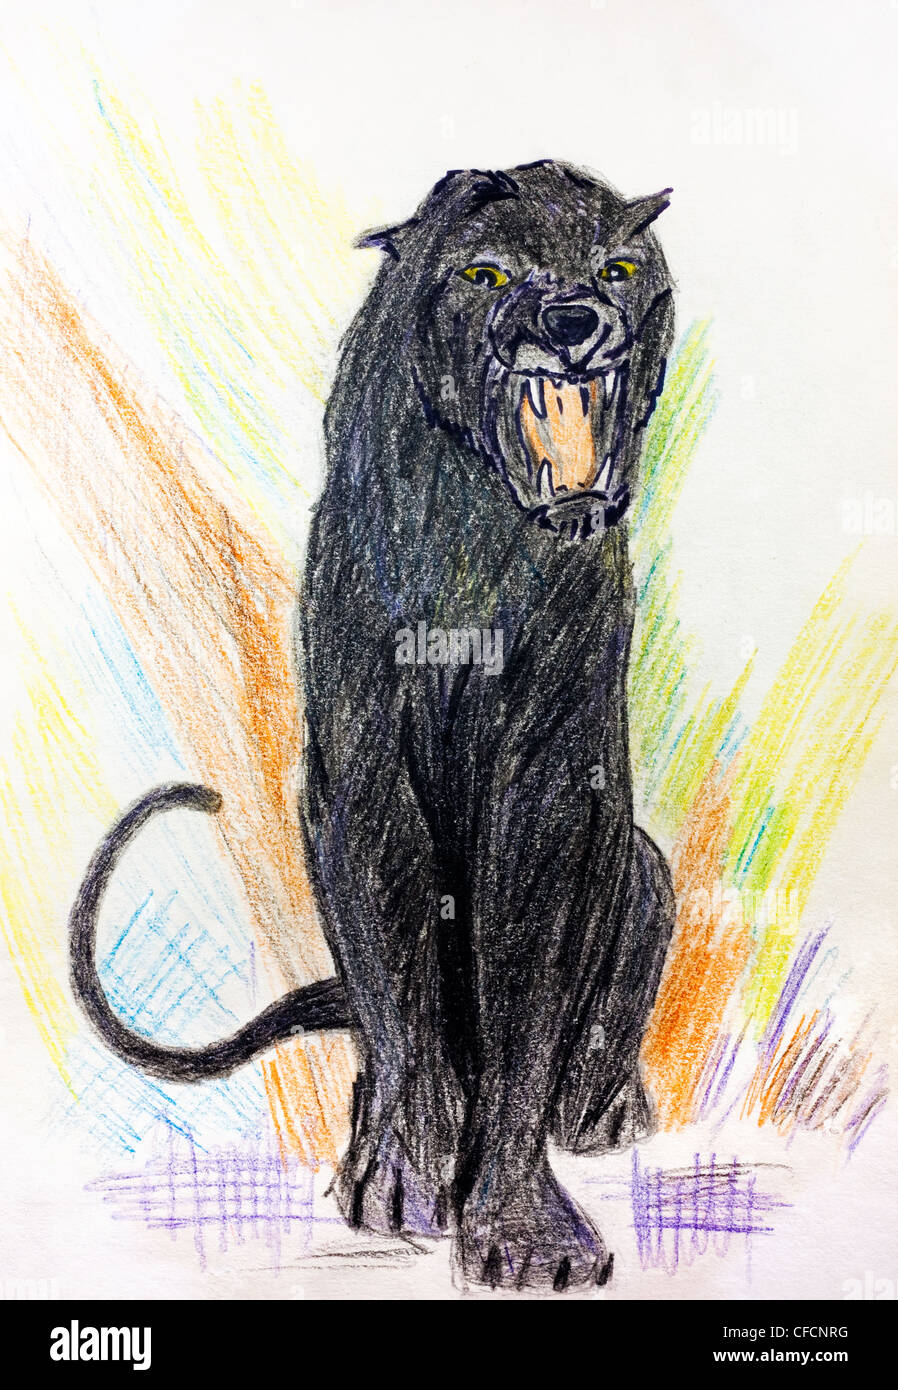 Child painting of a black puma or panther roaring Stock Photo